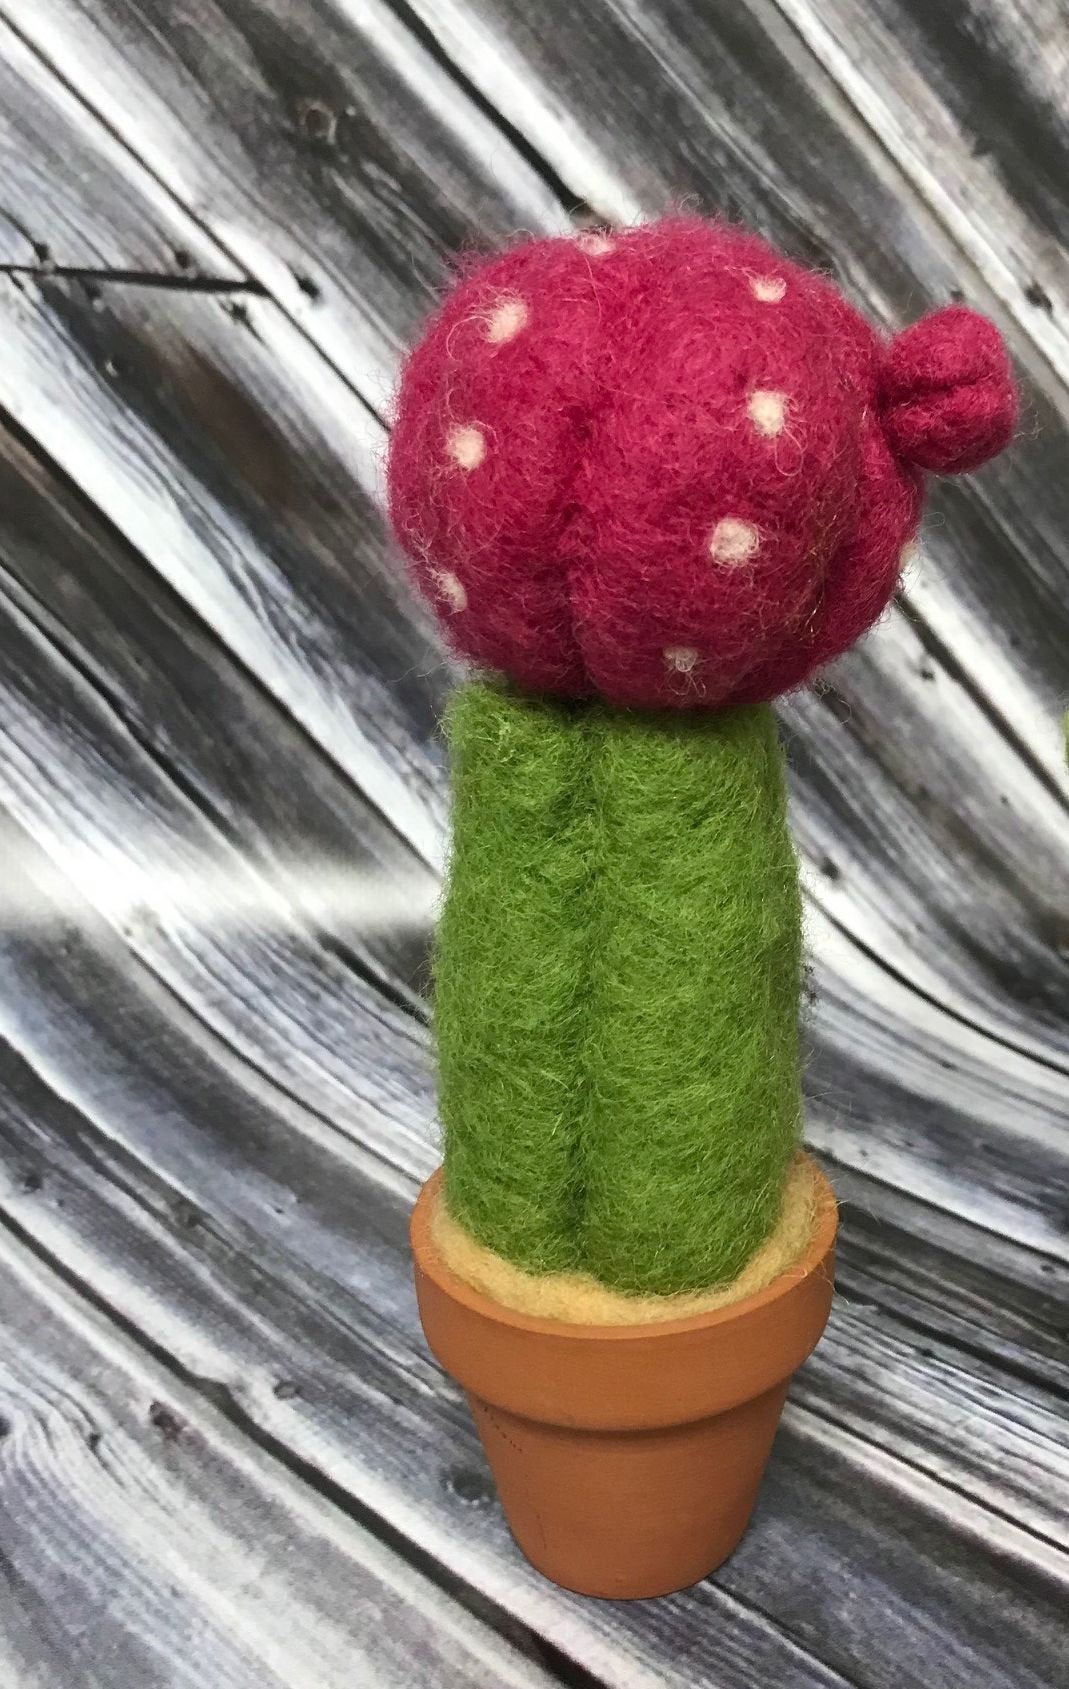 Kissbuty Full Range of Needle Felting Kit, Cactus Wool Felted Set for Adults and Beginners Including Wool Roving for 8 Succulents, Foam Mat, Glass